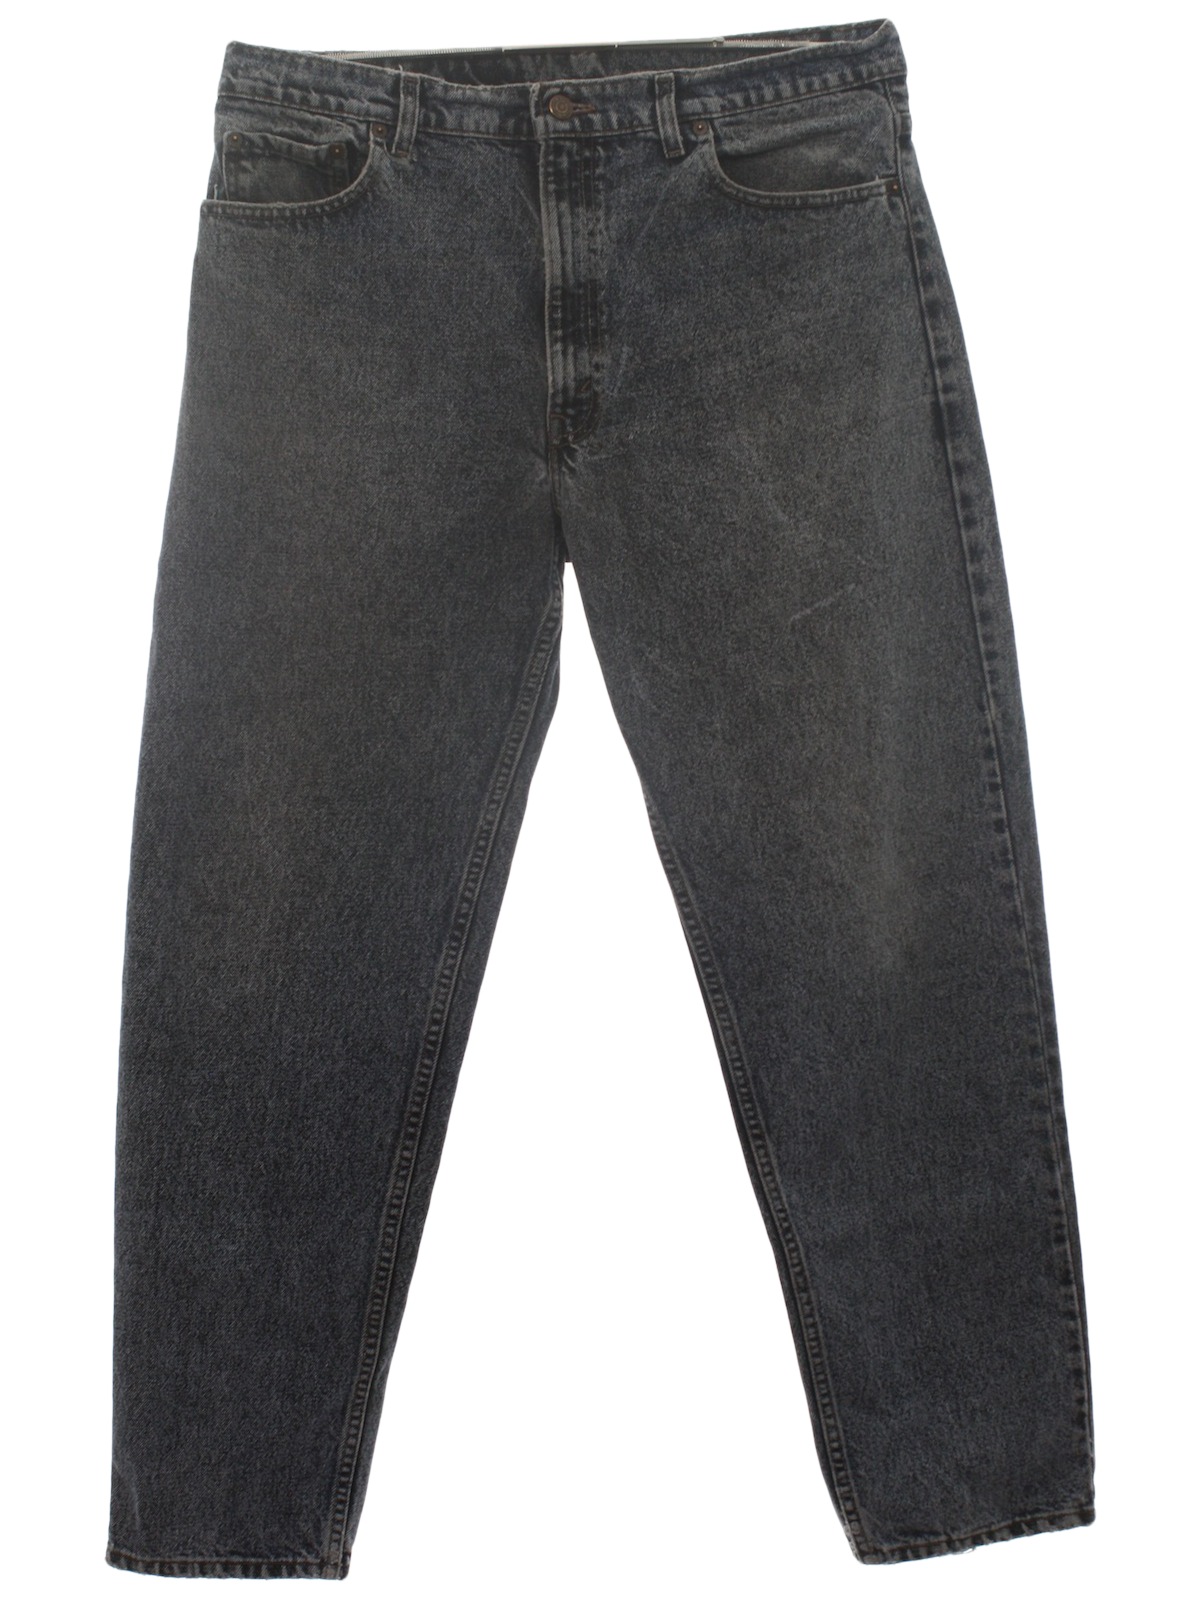 1980's Retro Pants: 80s -Levis 550- Mens grey background stone washed ...